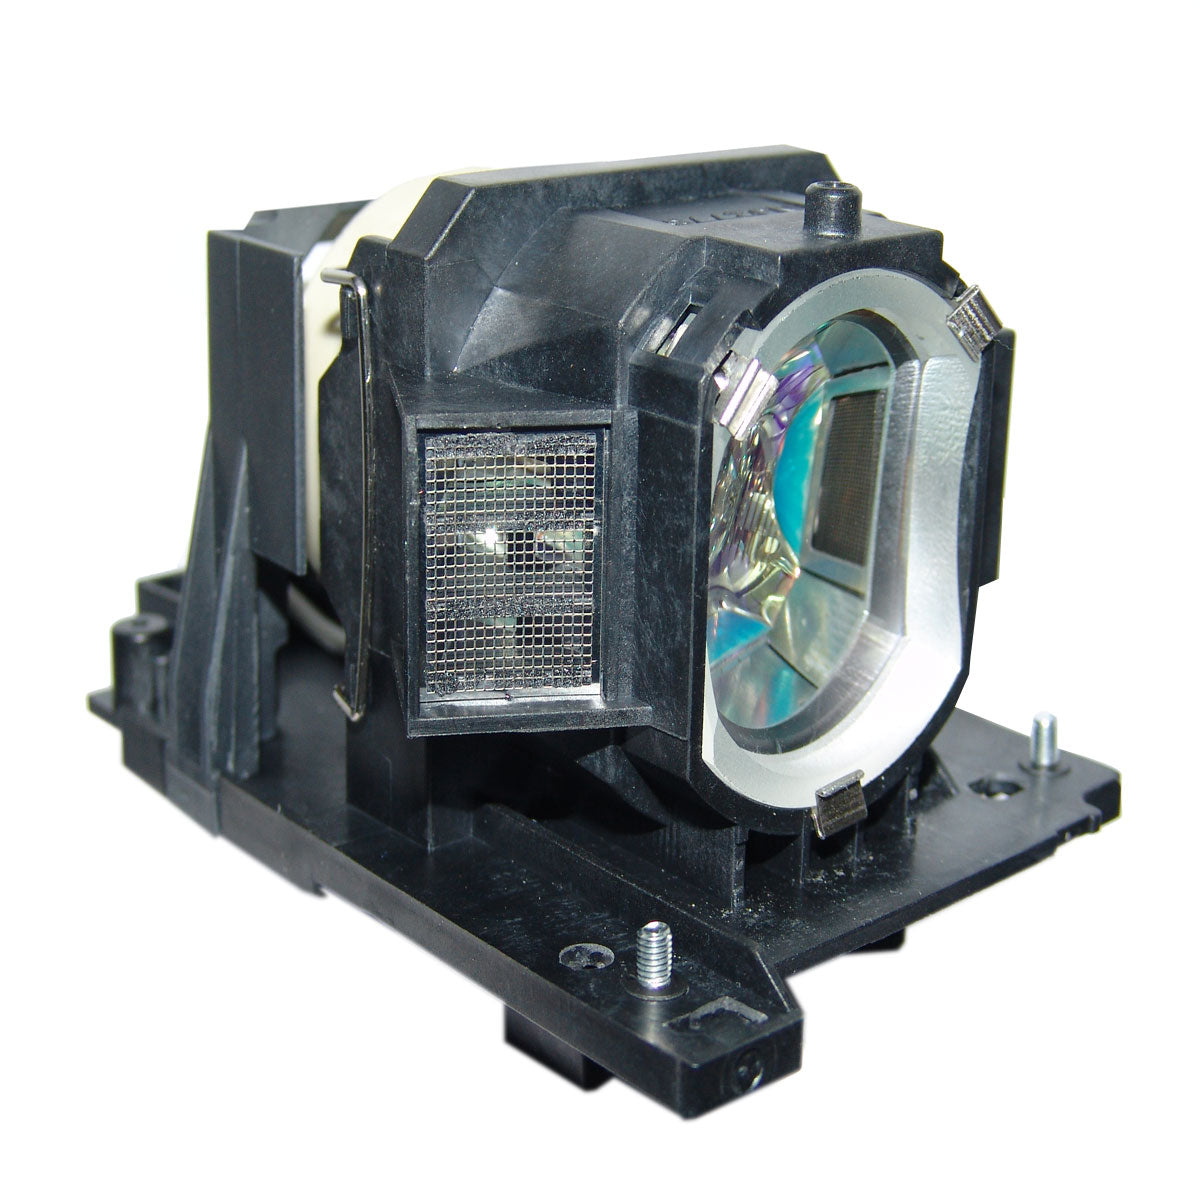 Philips 9144 000 00695 Philips Projector Lamp Module